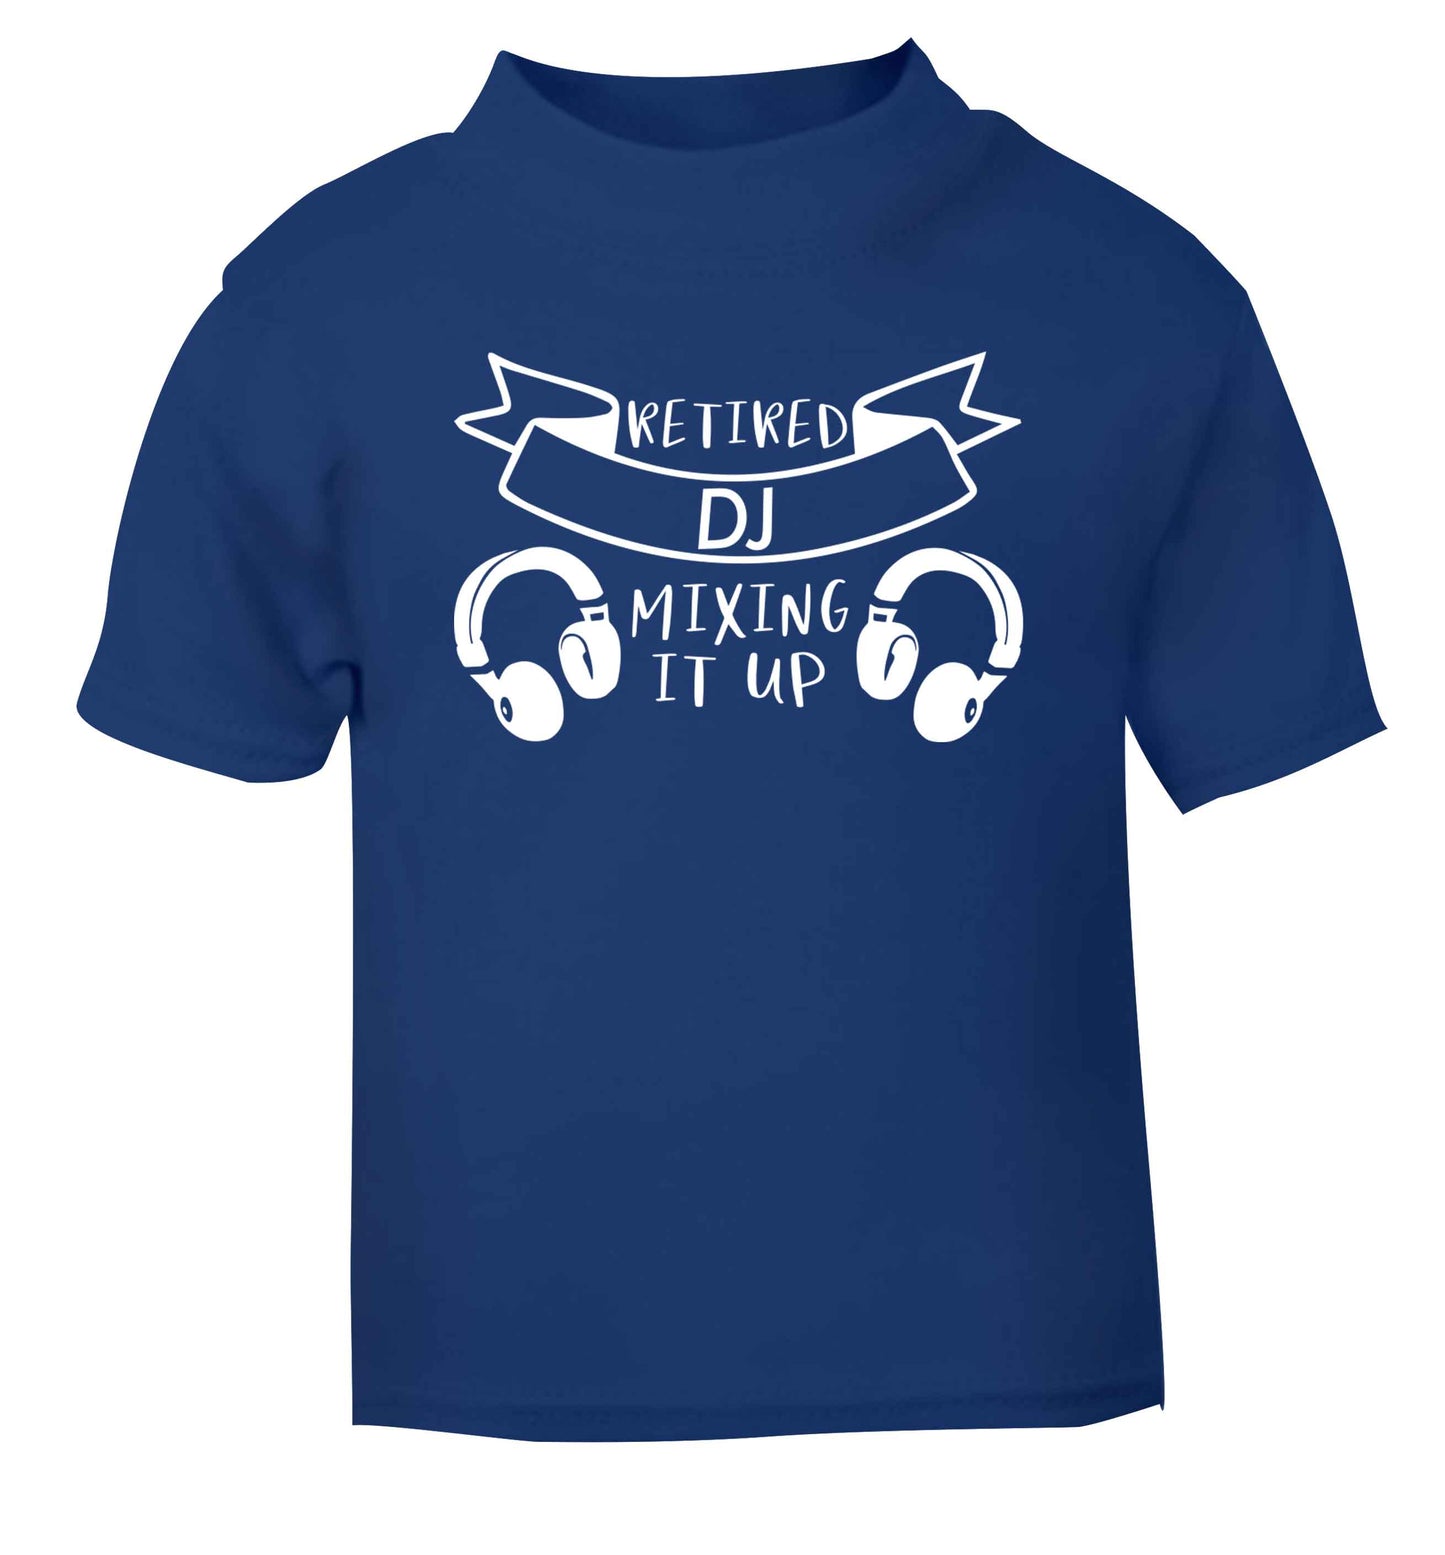 Retired DJ mixing it up blue Baby Toddler Tshirt 2 Years